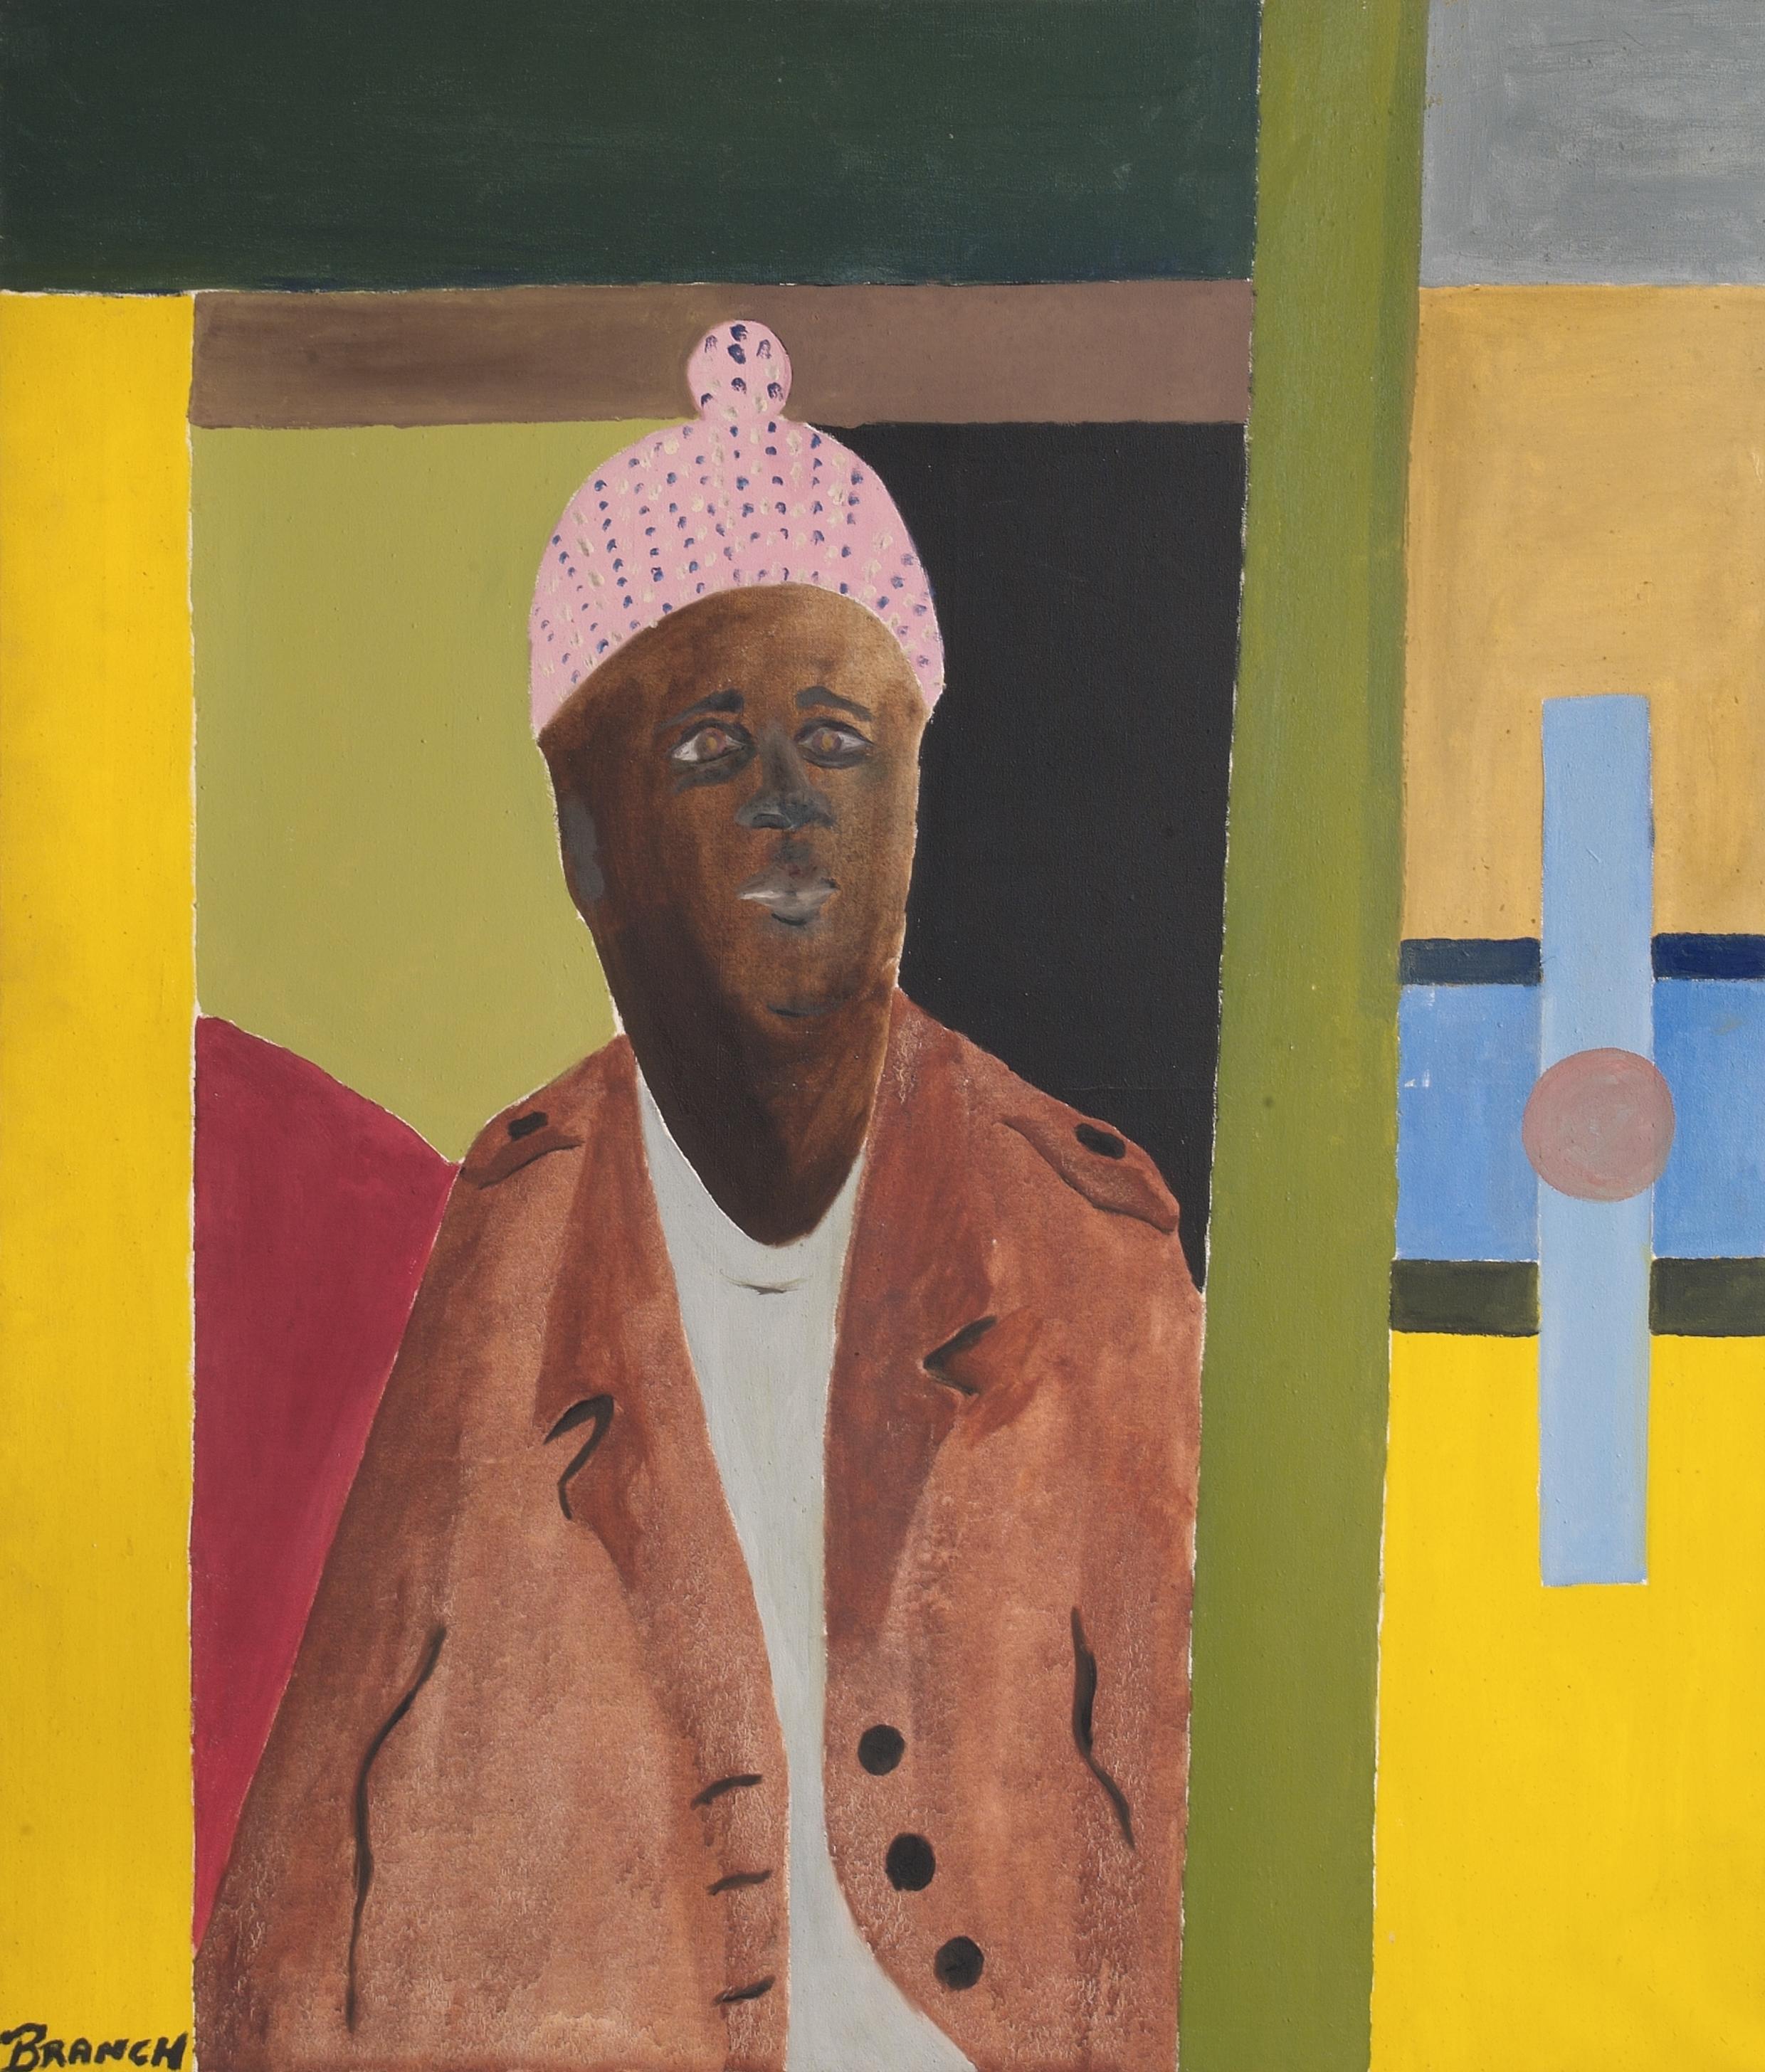 Winston Branch, West Indian, 1973